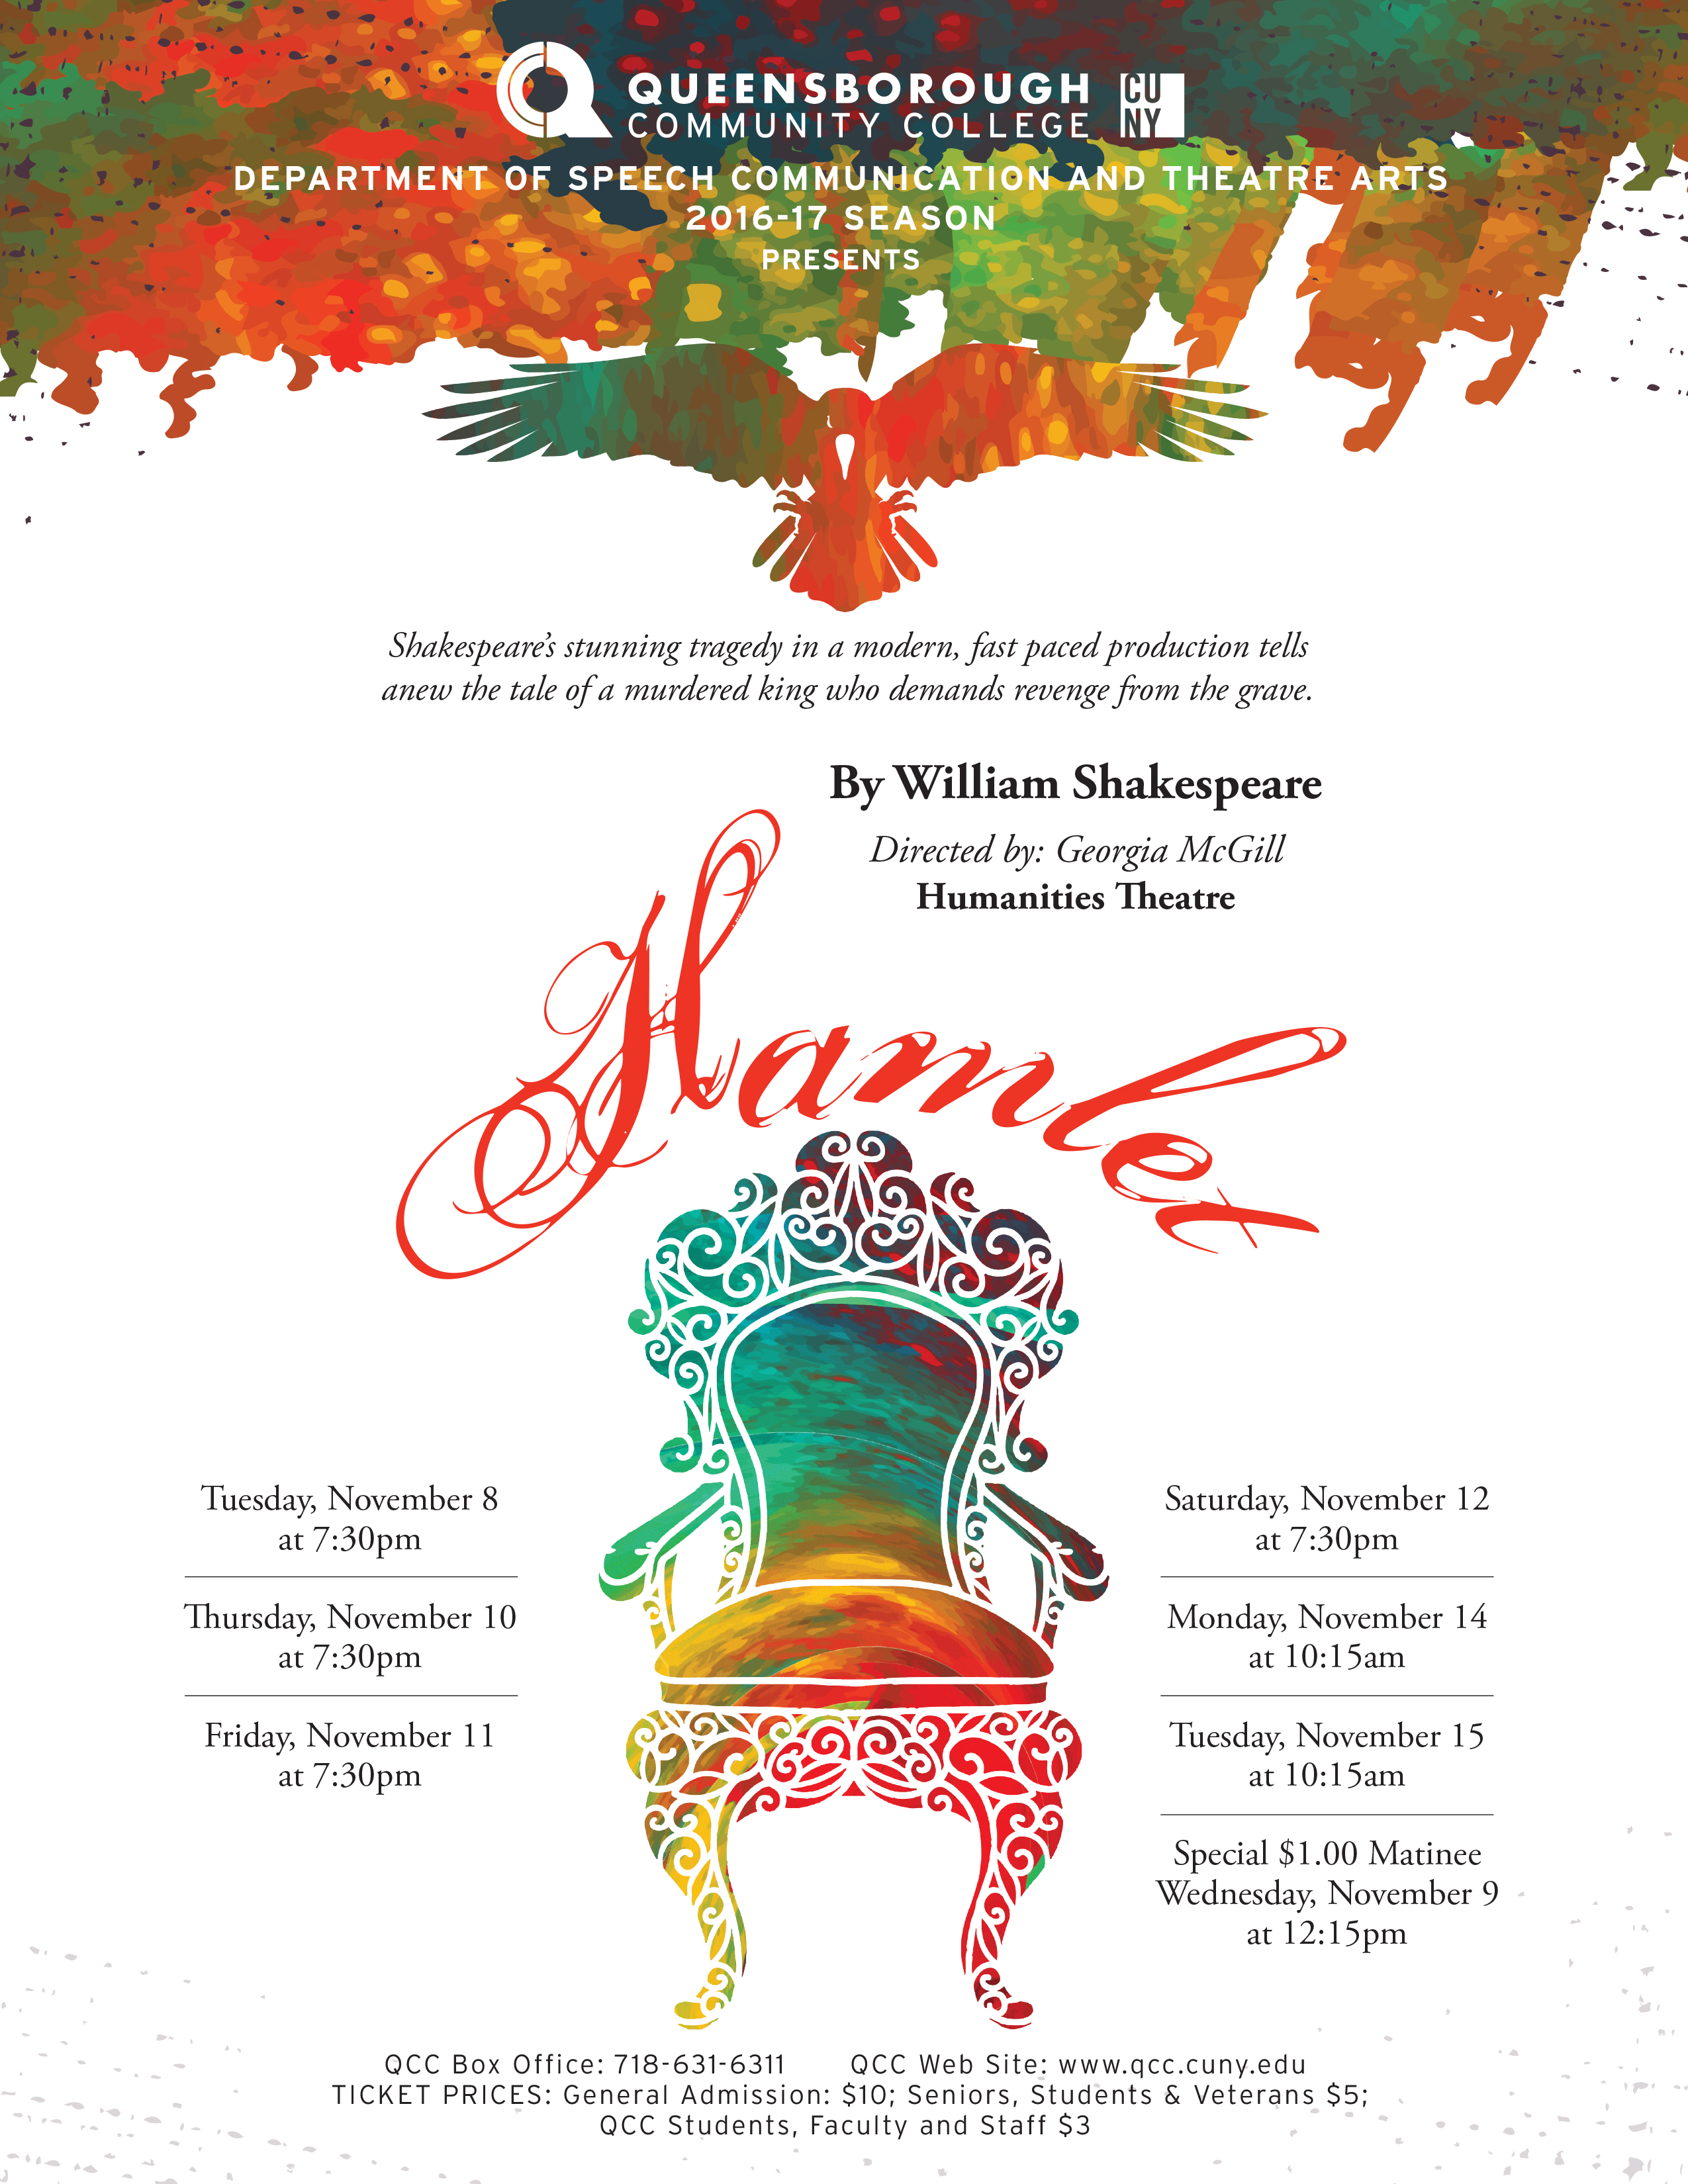 This is a poster for the past fall 2016 production of ‘Hamlet’, written by William Shakespeare, and directed by Professor McGill. The poster displays a tie-dyed arm chair and a tie-dyed dove hovering above. 